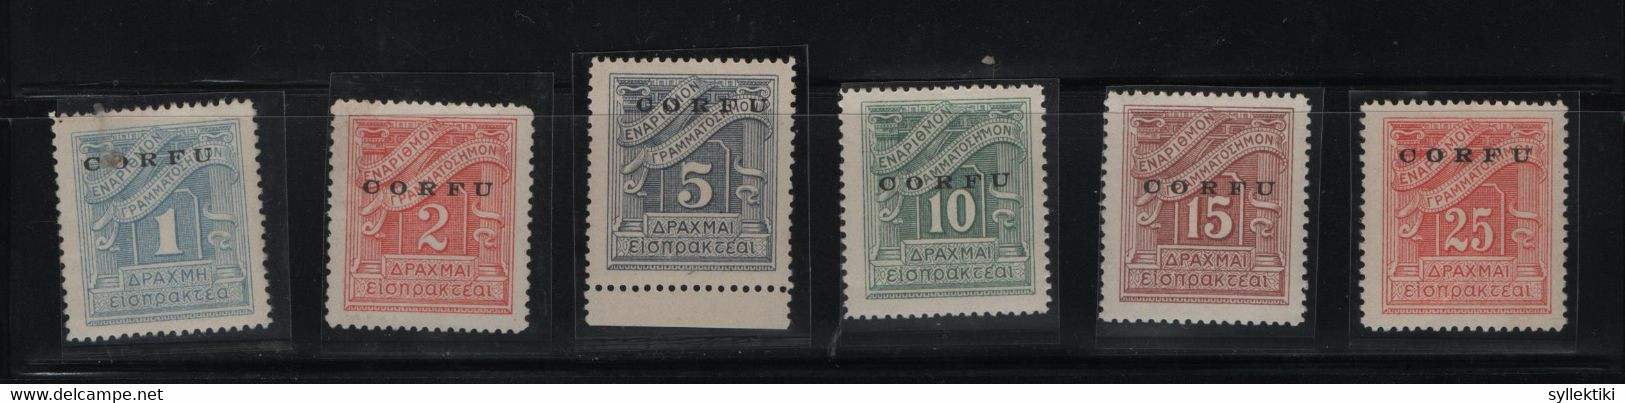 GREECE 1941 CORFU OVERPRINT ON POSTAGE DUE 6 DIFFERENT MNH/MH STAMPS  HELLAS No 38 - 43 AND VALUE  EURO 4010.00  1 DRACH - Ionian Islands